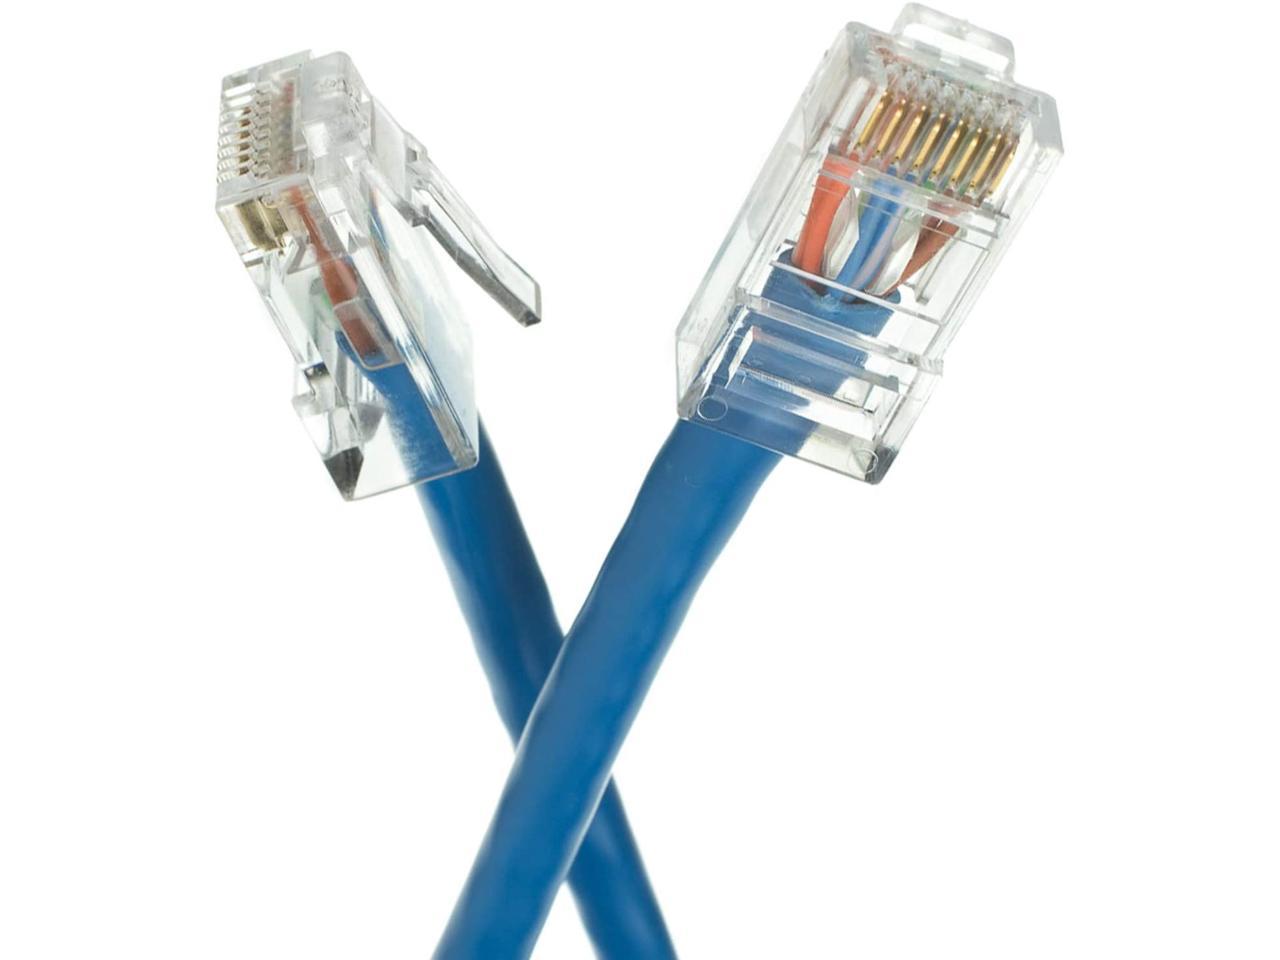 1Gigabit/Sec High Speed LAN Internet/Patch Cable 24AWG Network Cable with Gold Plated RJ45 Non-Booted Connector 350MHz GOWOS Cat5e Ethernet Cable 50-Pack - 5 Feet Gray 